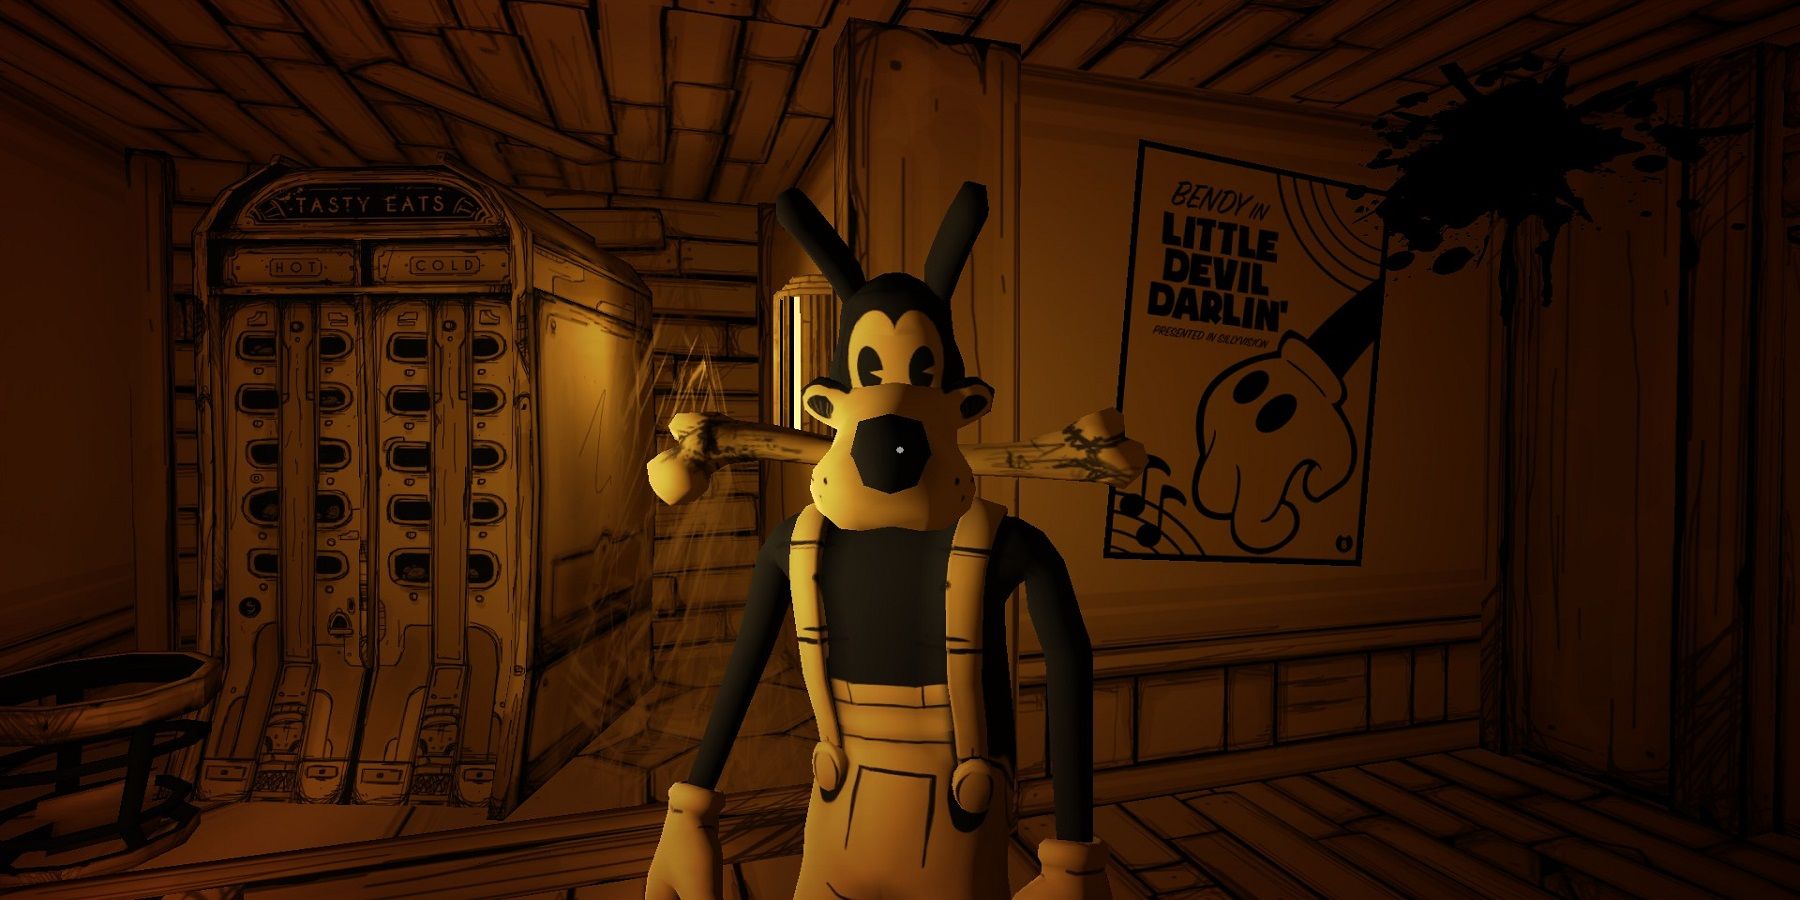 Buddy Boris from Bendy and the Ink Machine